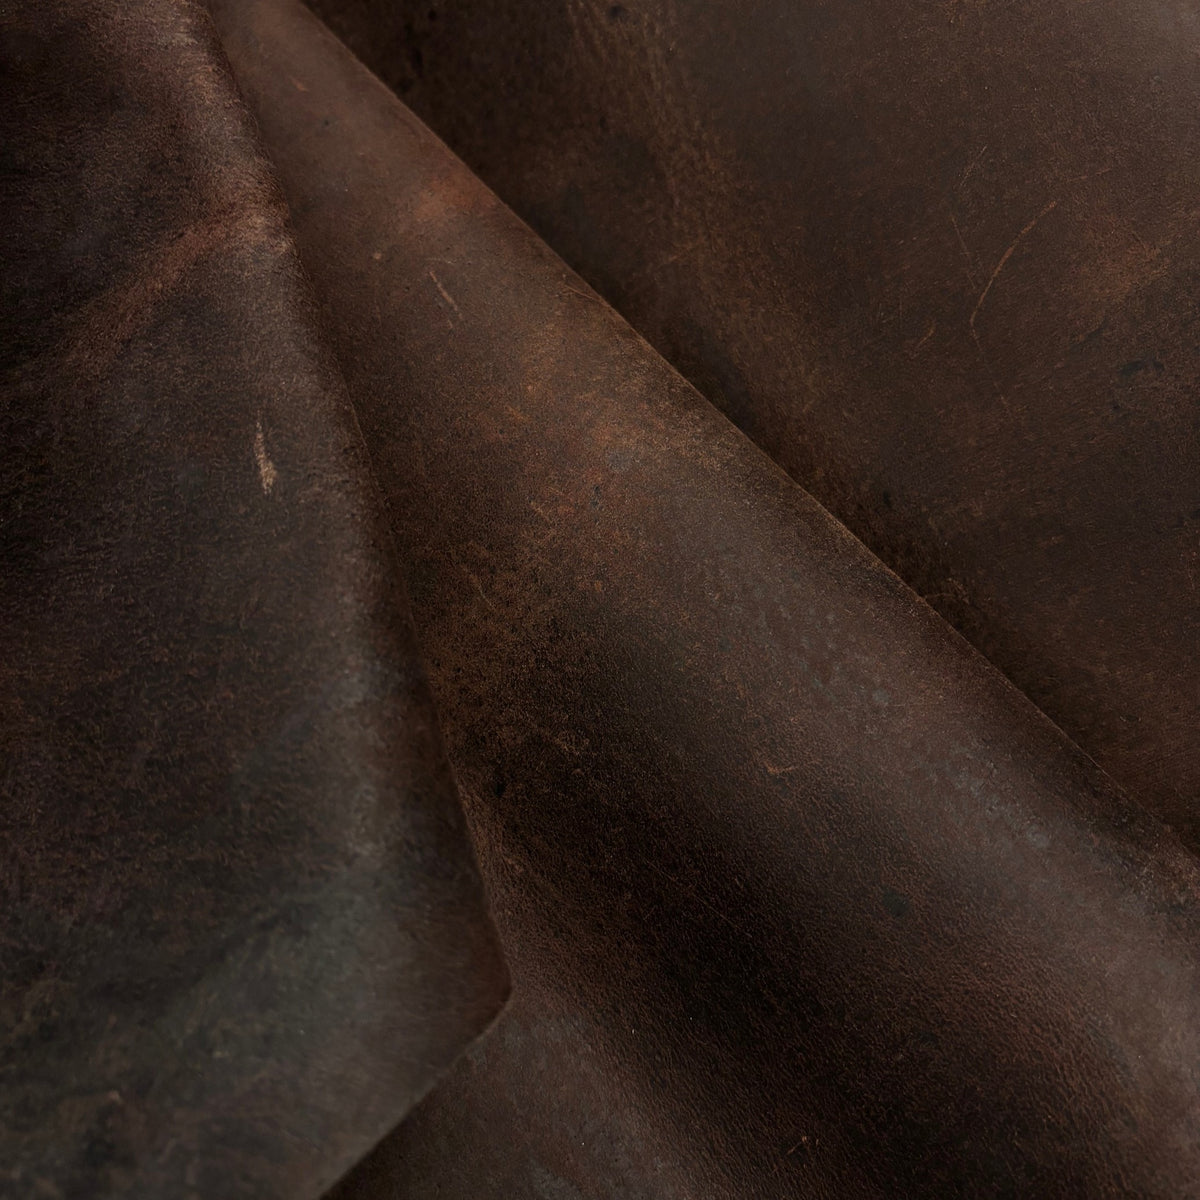 Waxy Distressed Boar Leather Hide | Made in America